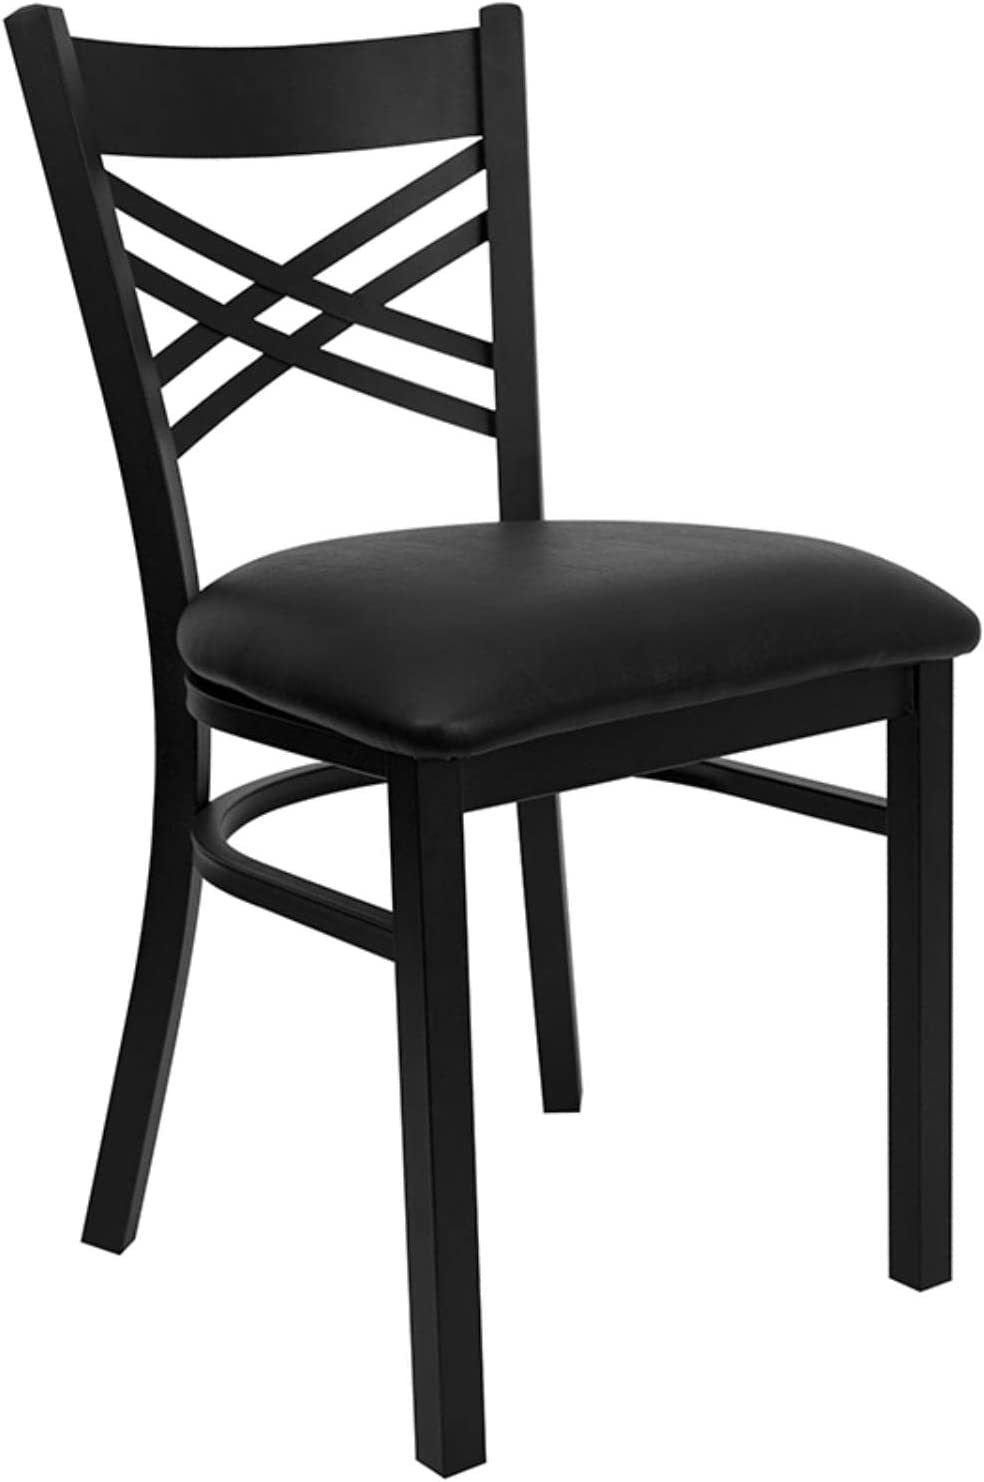 Black ''X'' Back Metal Restaurant Chair With Black Vinyl Seat From The Hercules - $85.94